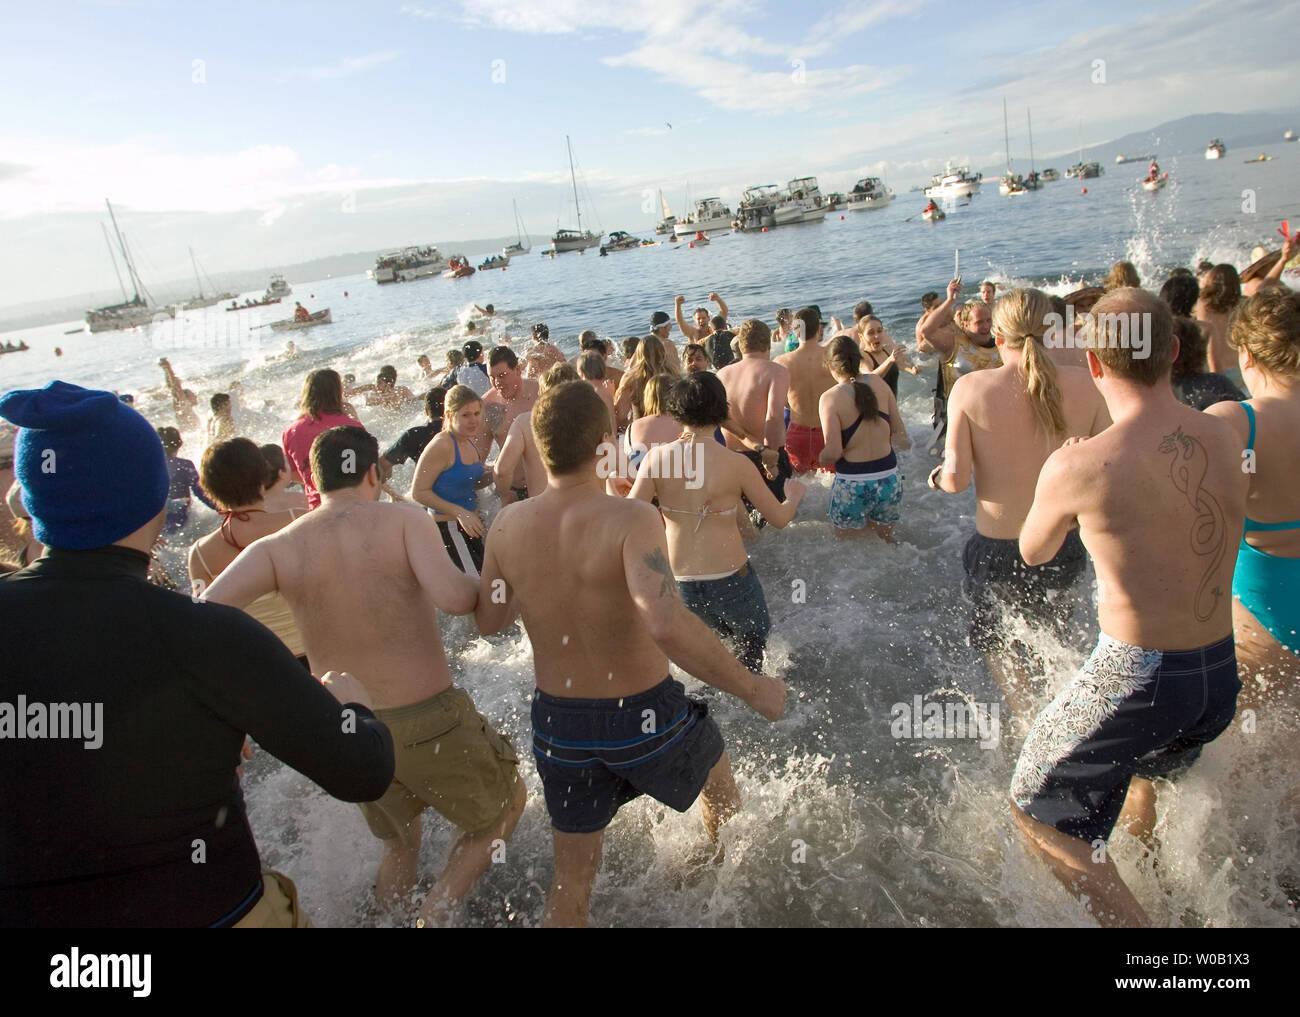 Some two thousand New Years Day revelers brave the frigid waters of downtown Vancouver's English Bay during the 85th Annual Polar Bear Swim, January 1, 2005.    (UPI Photo / Heinz Ruckemann) Stock Photo